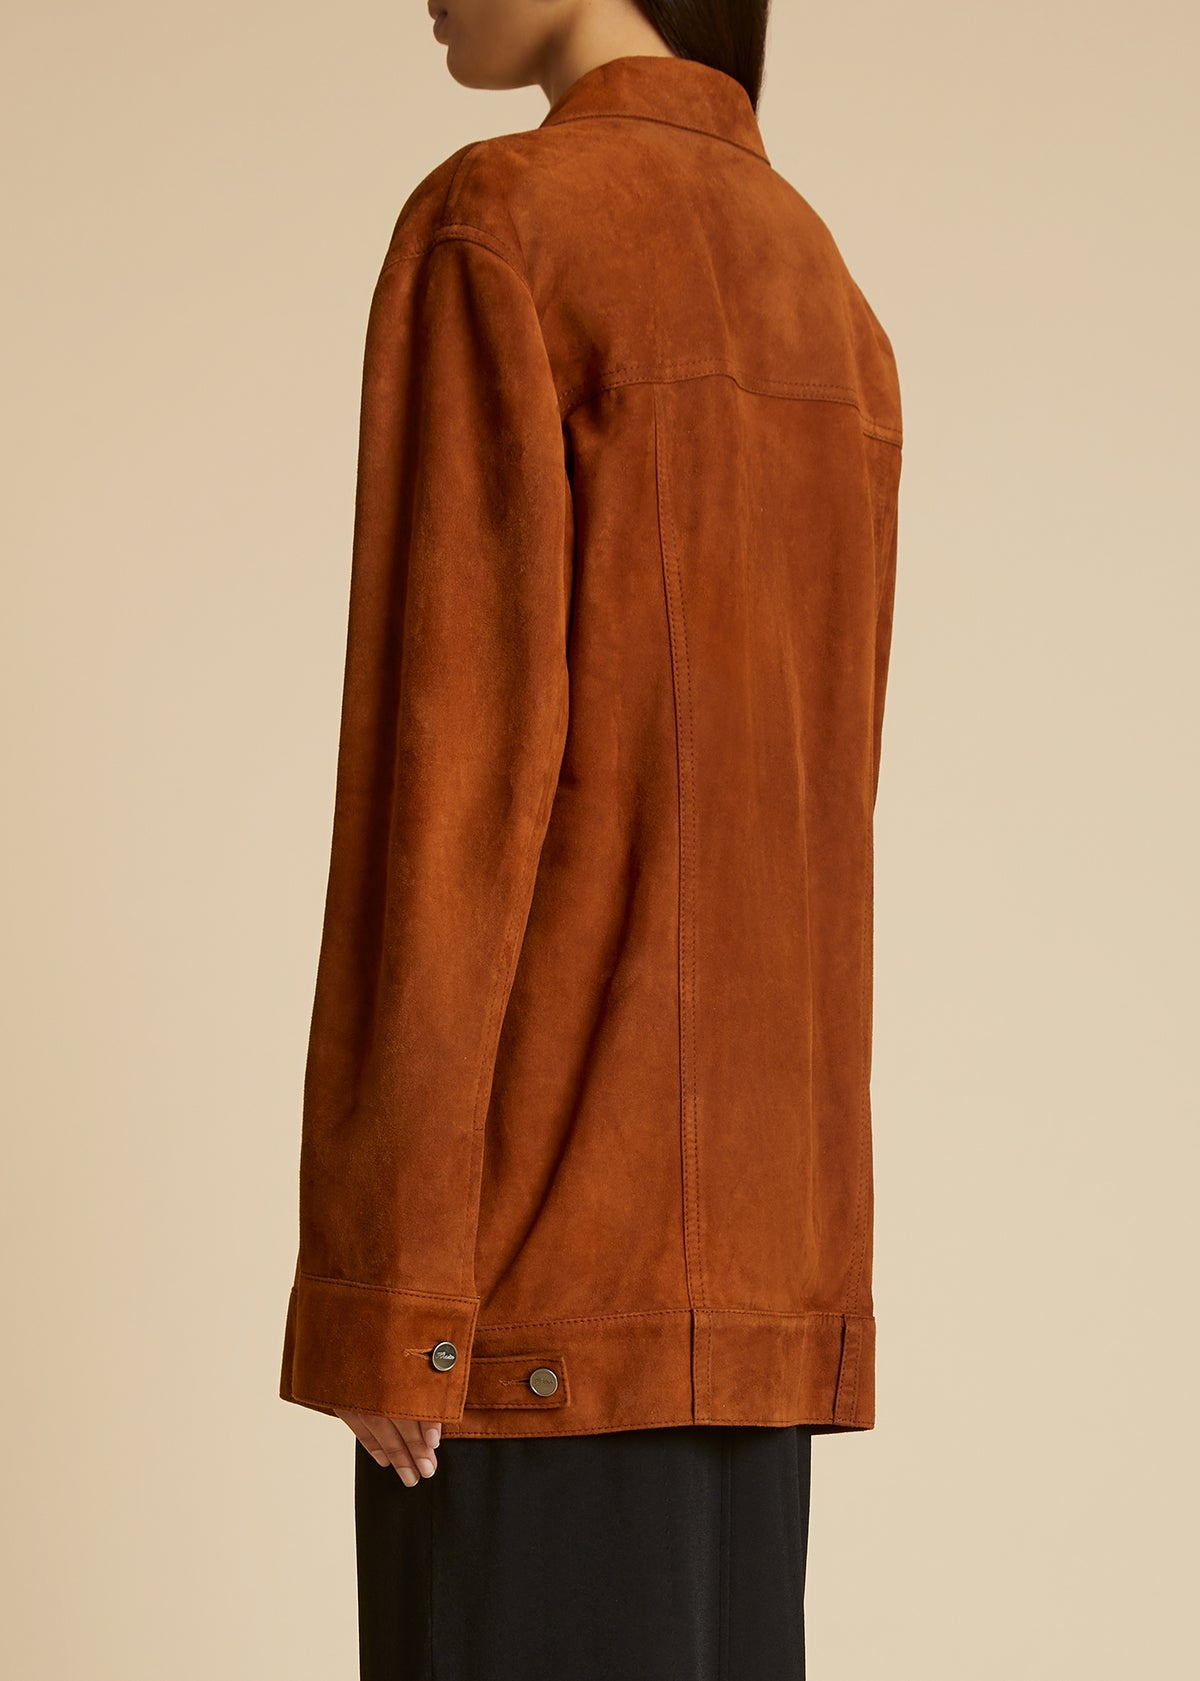 The Ross Jacket in Rust Suede - 3